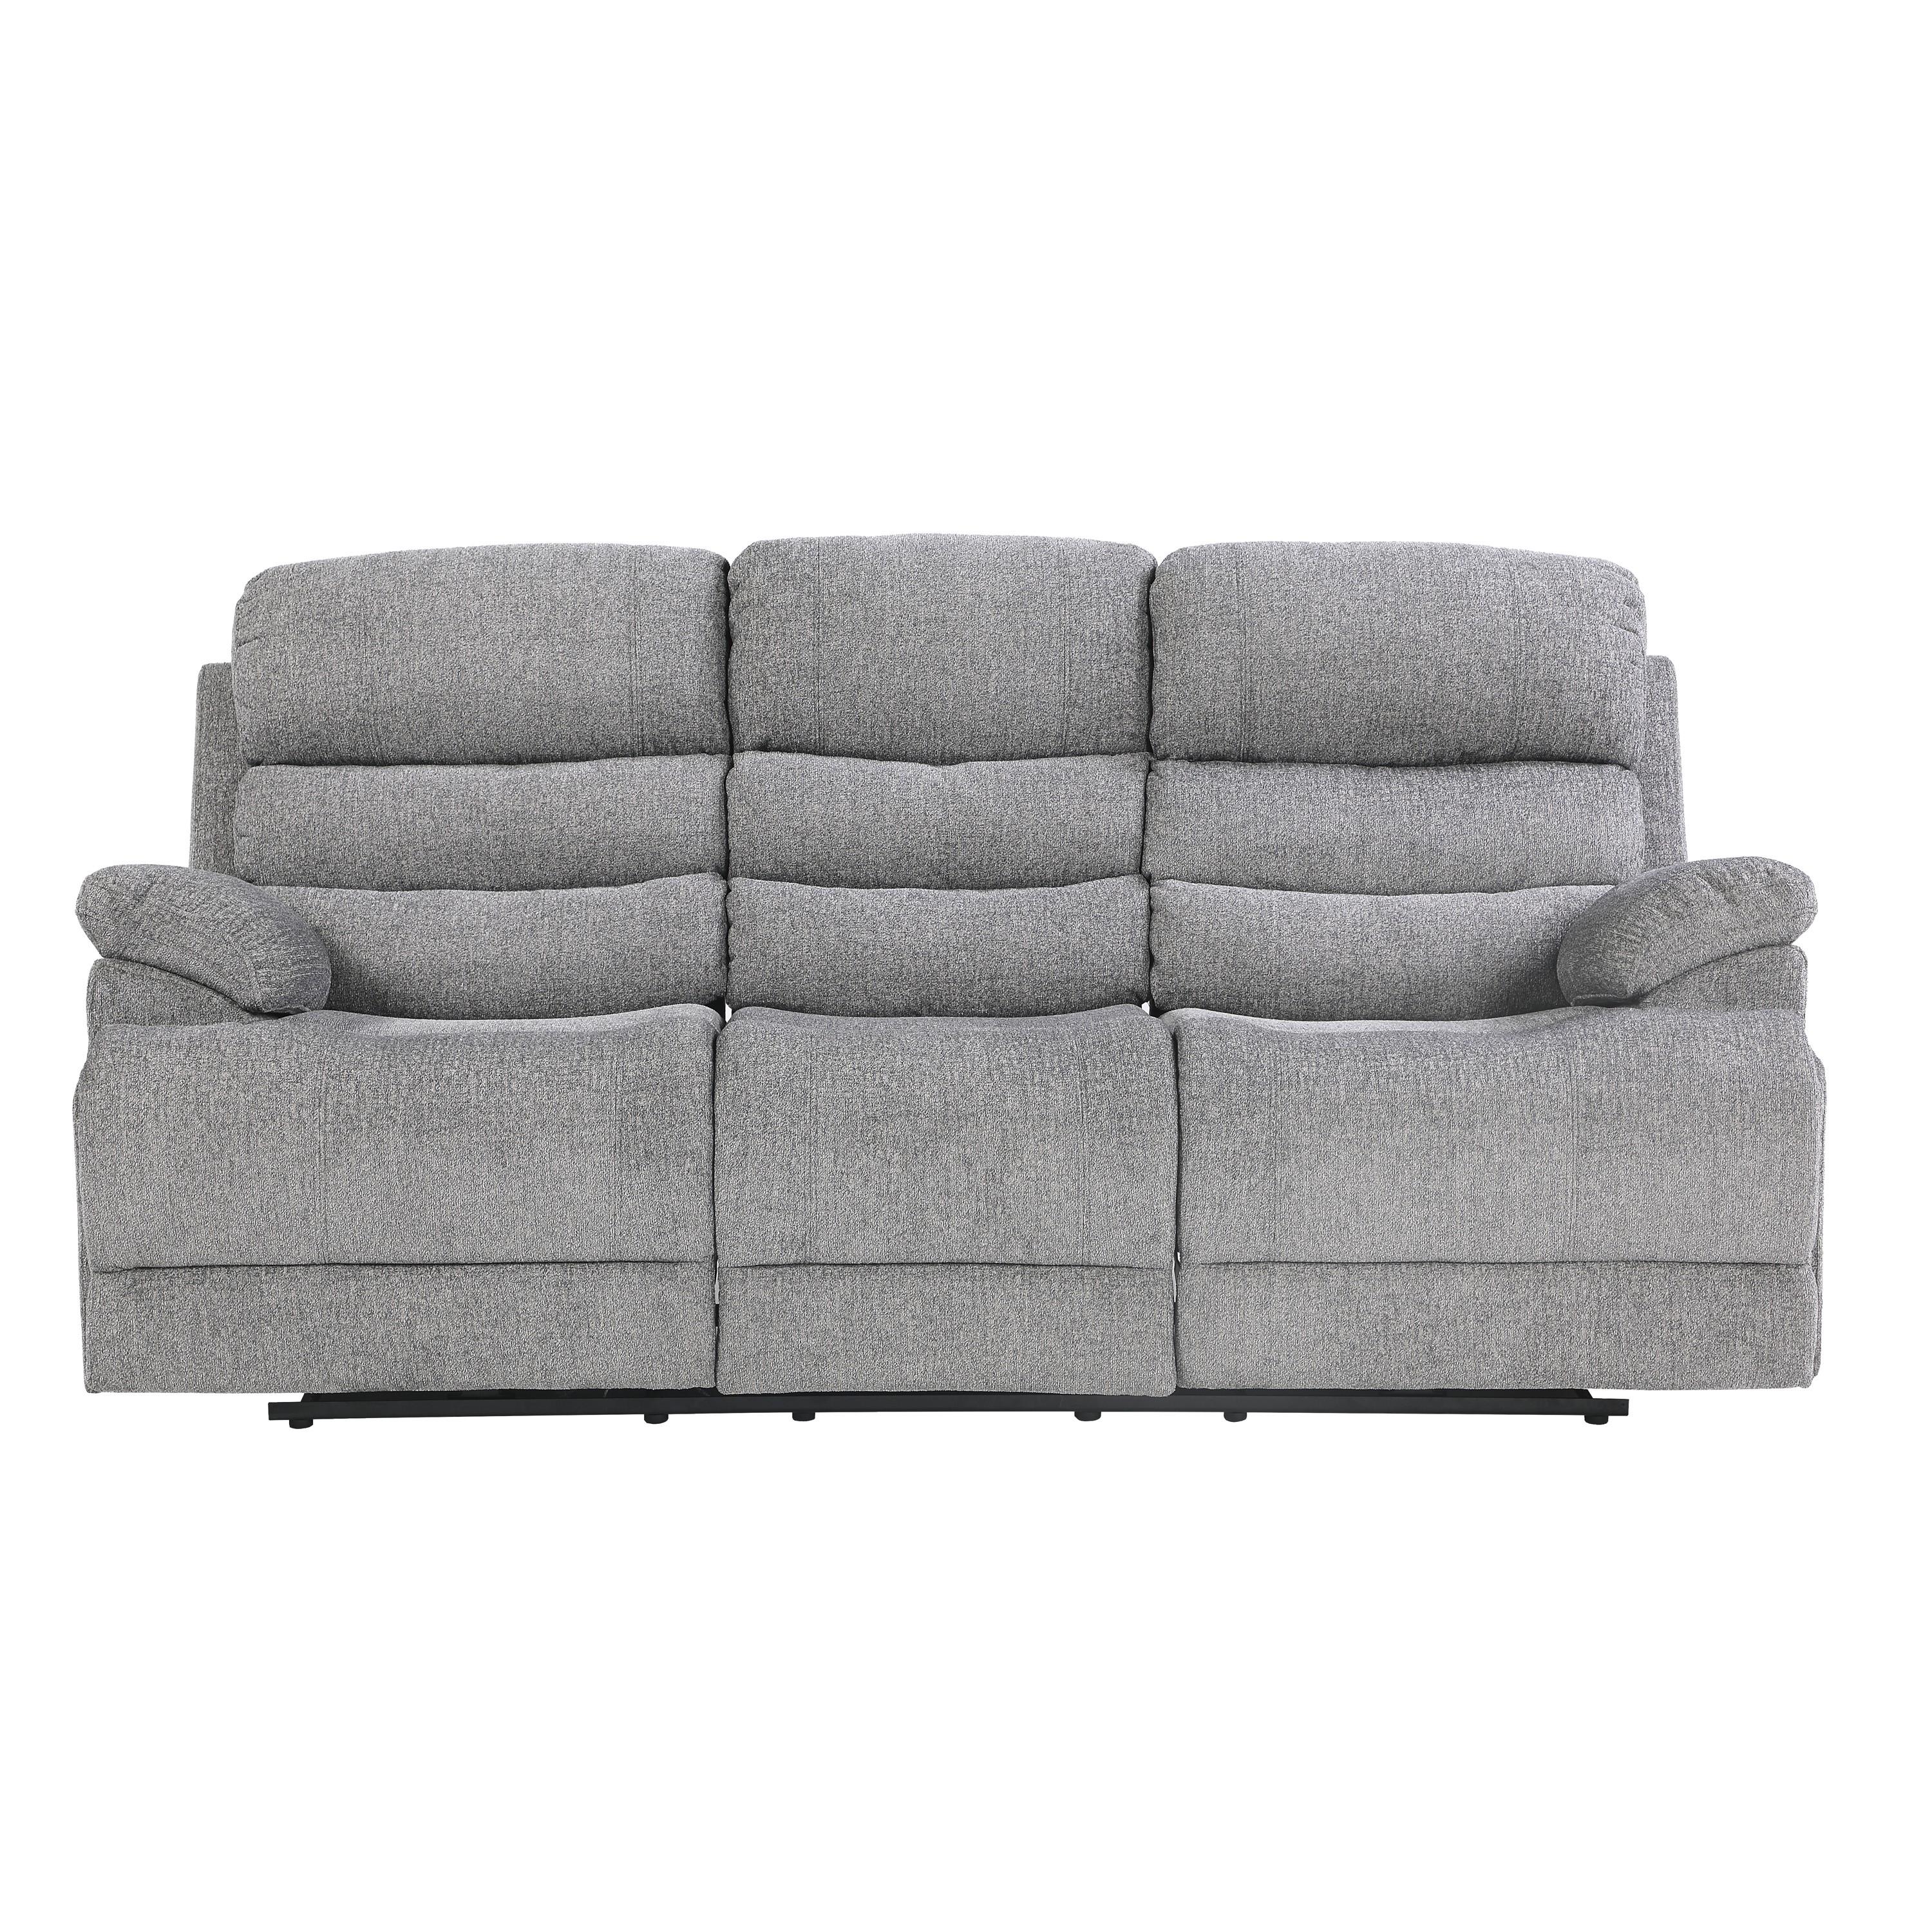 Transitional Power Reclining Sofa 9422FS-3PWH Sherbrook 9422FS-3PWH in Gray Chenille